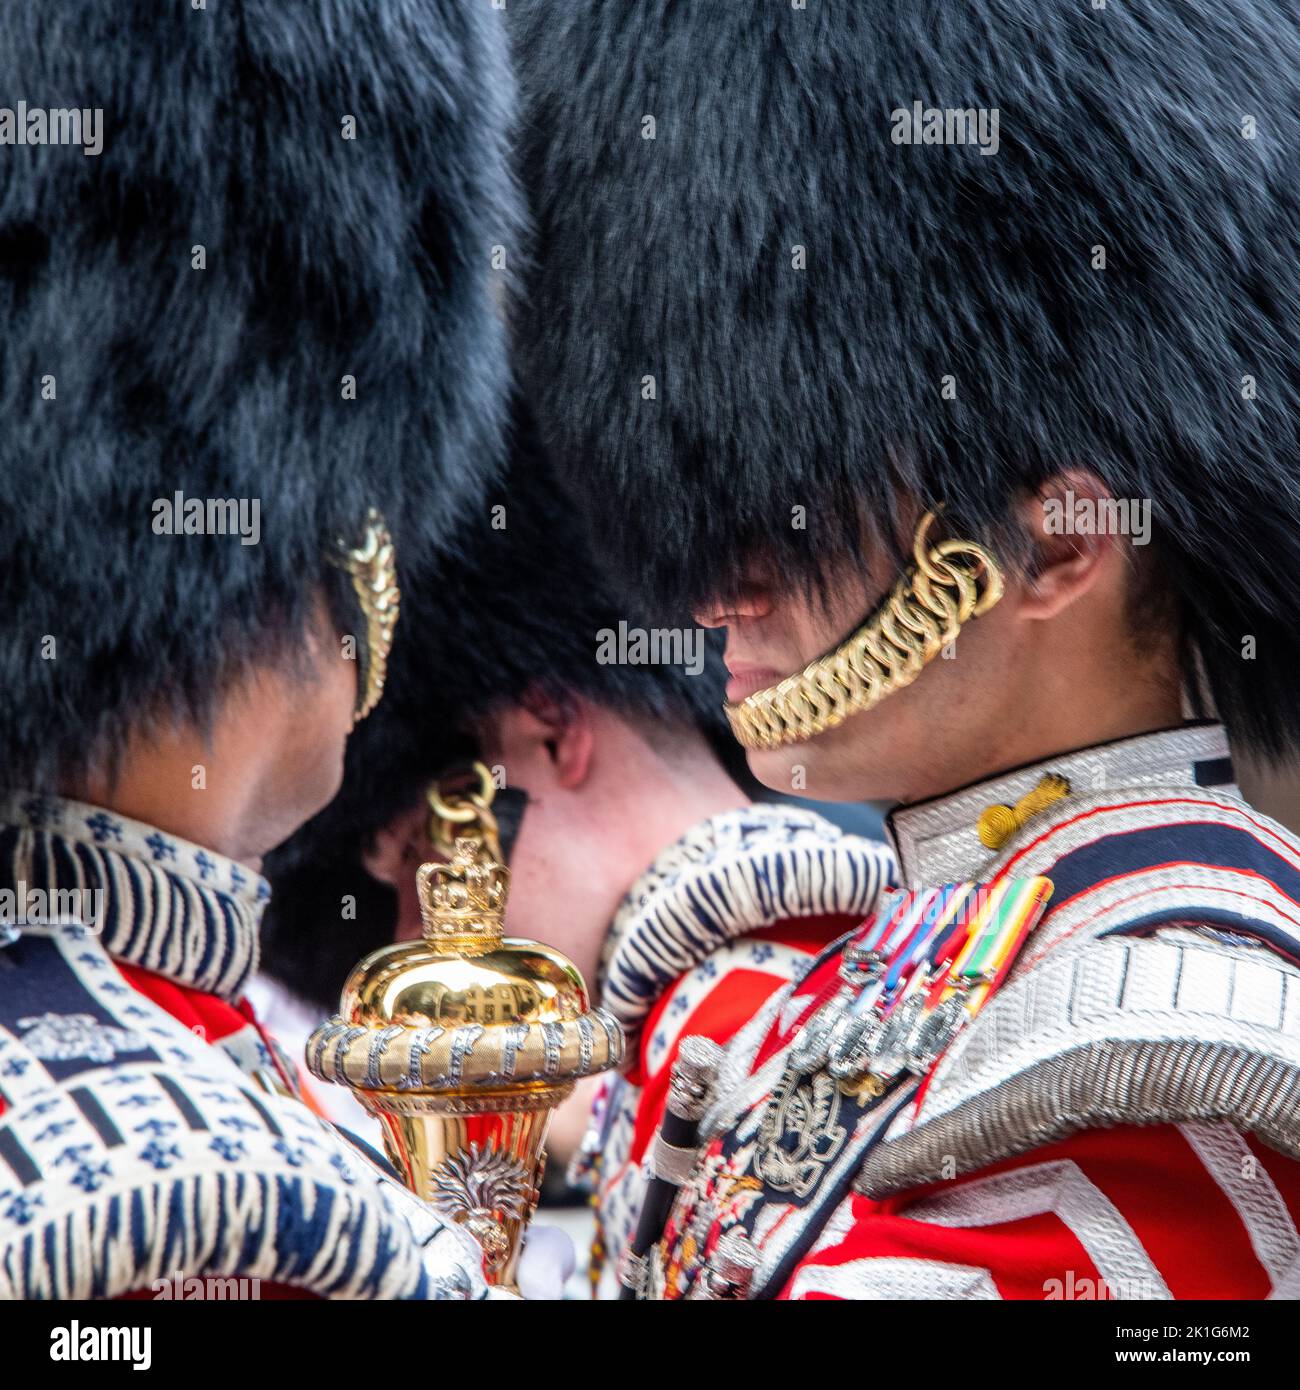 Part view of honor's foot guard with black feathered bonnet and decorations Stock Photo